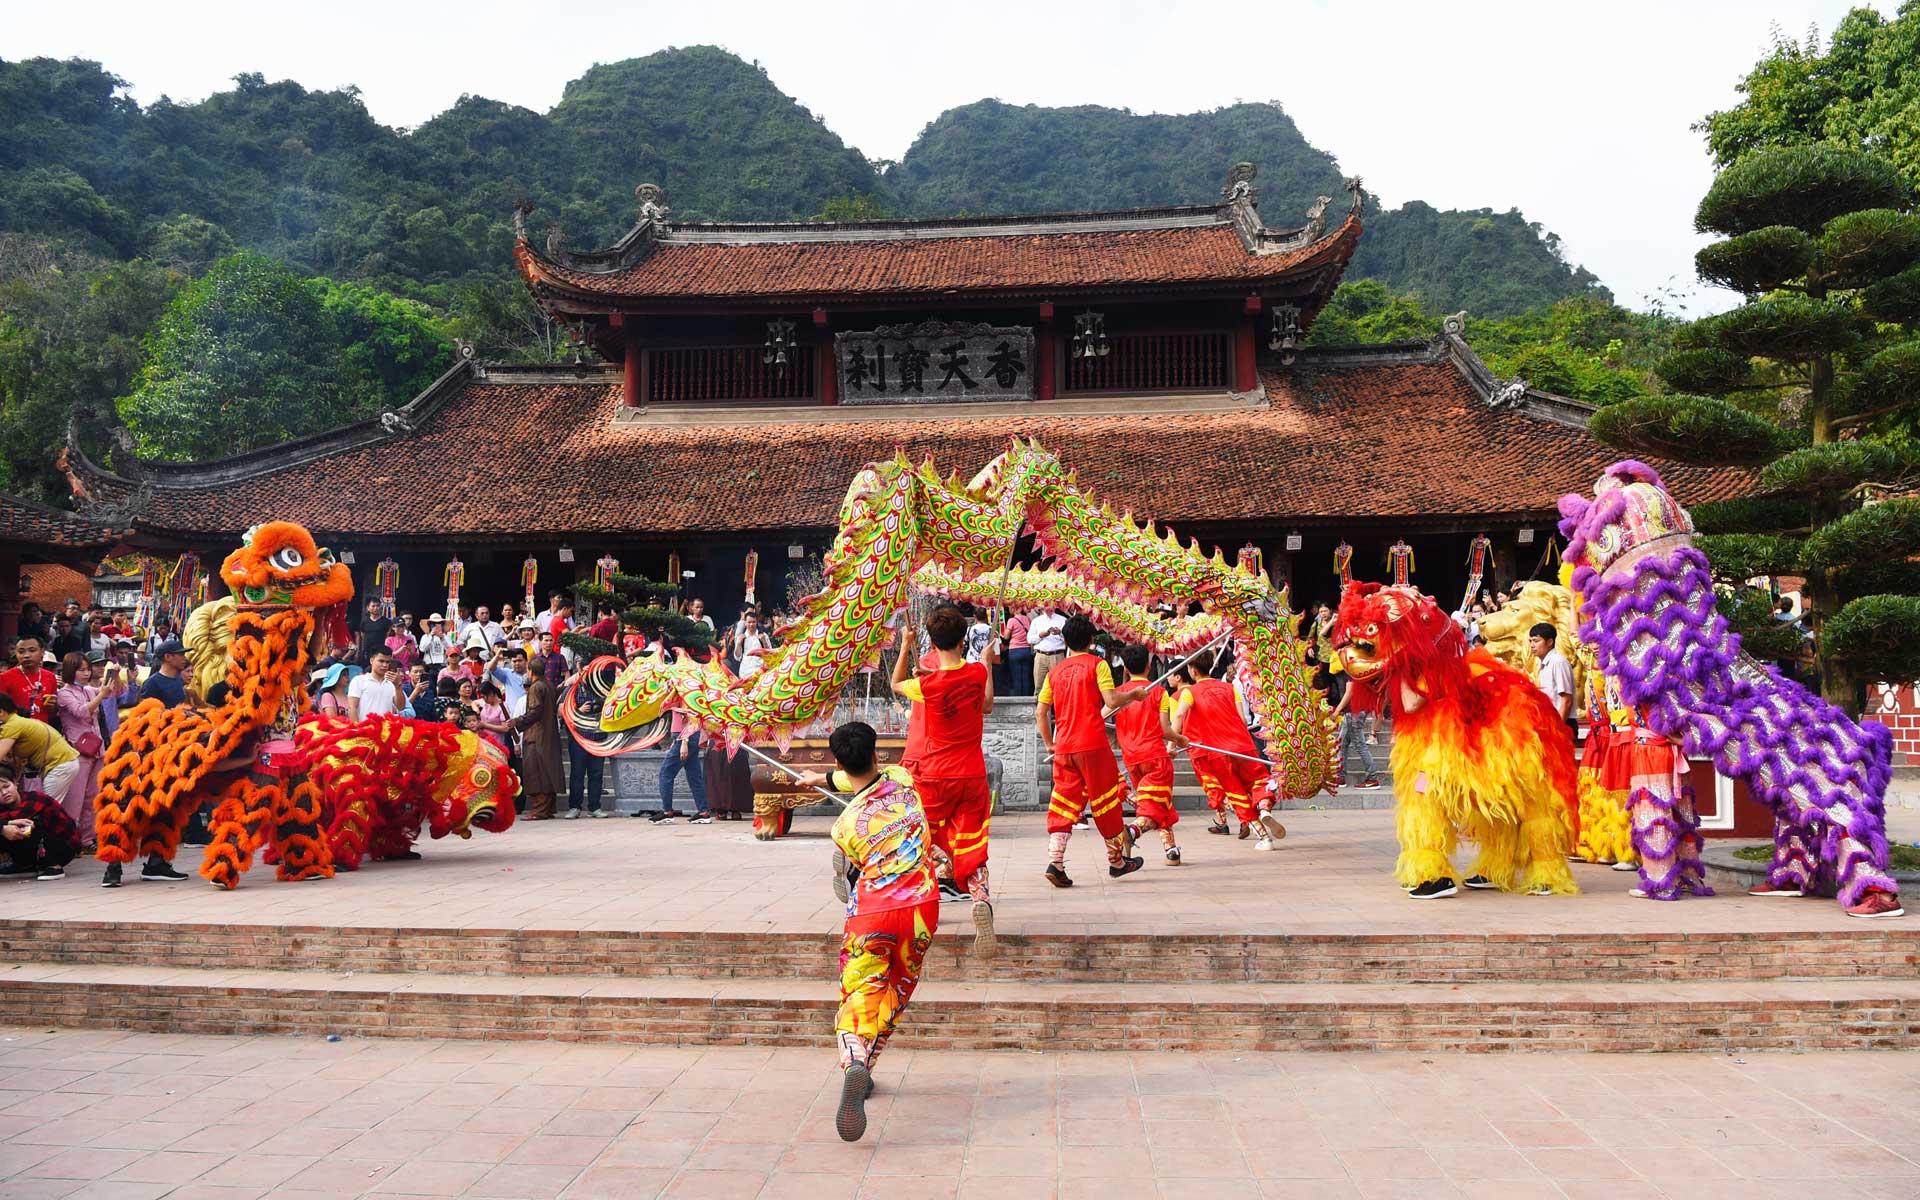 Lion dancing performance in front of Thien Tru Pagoda